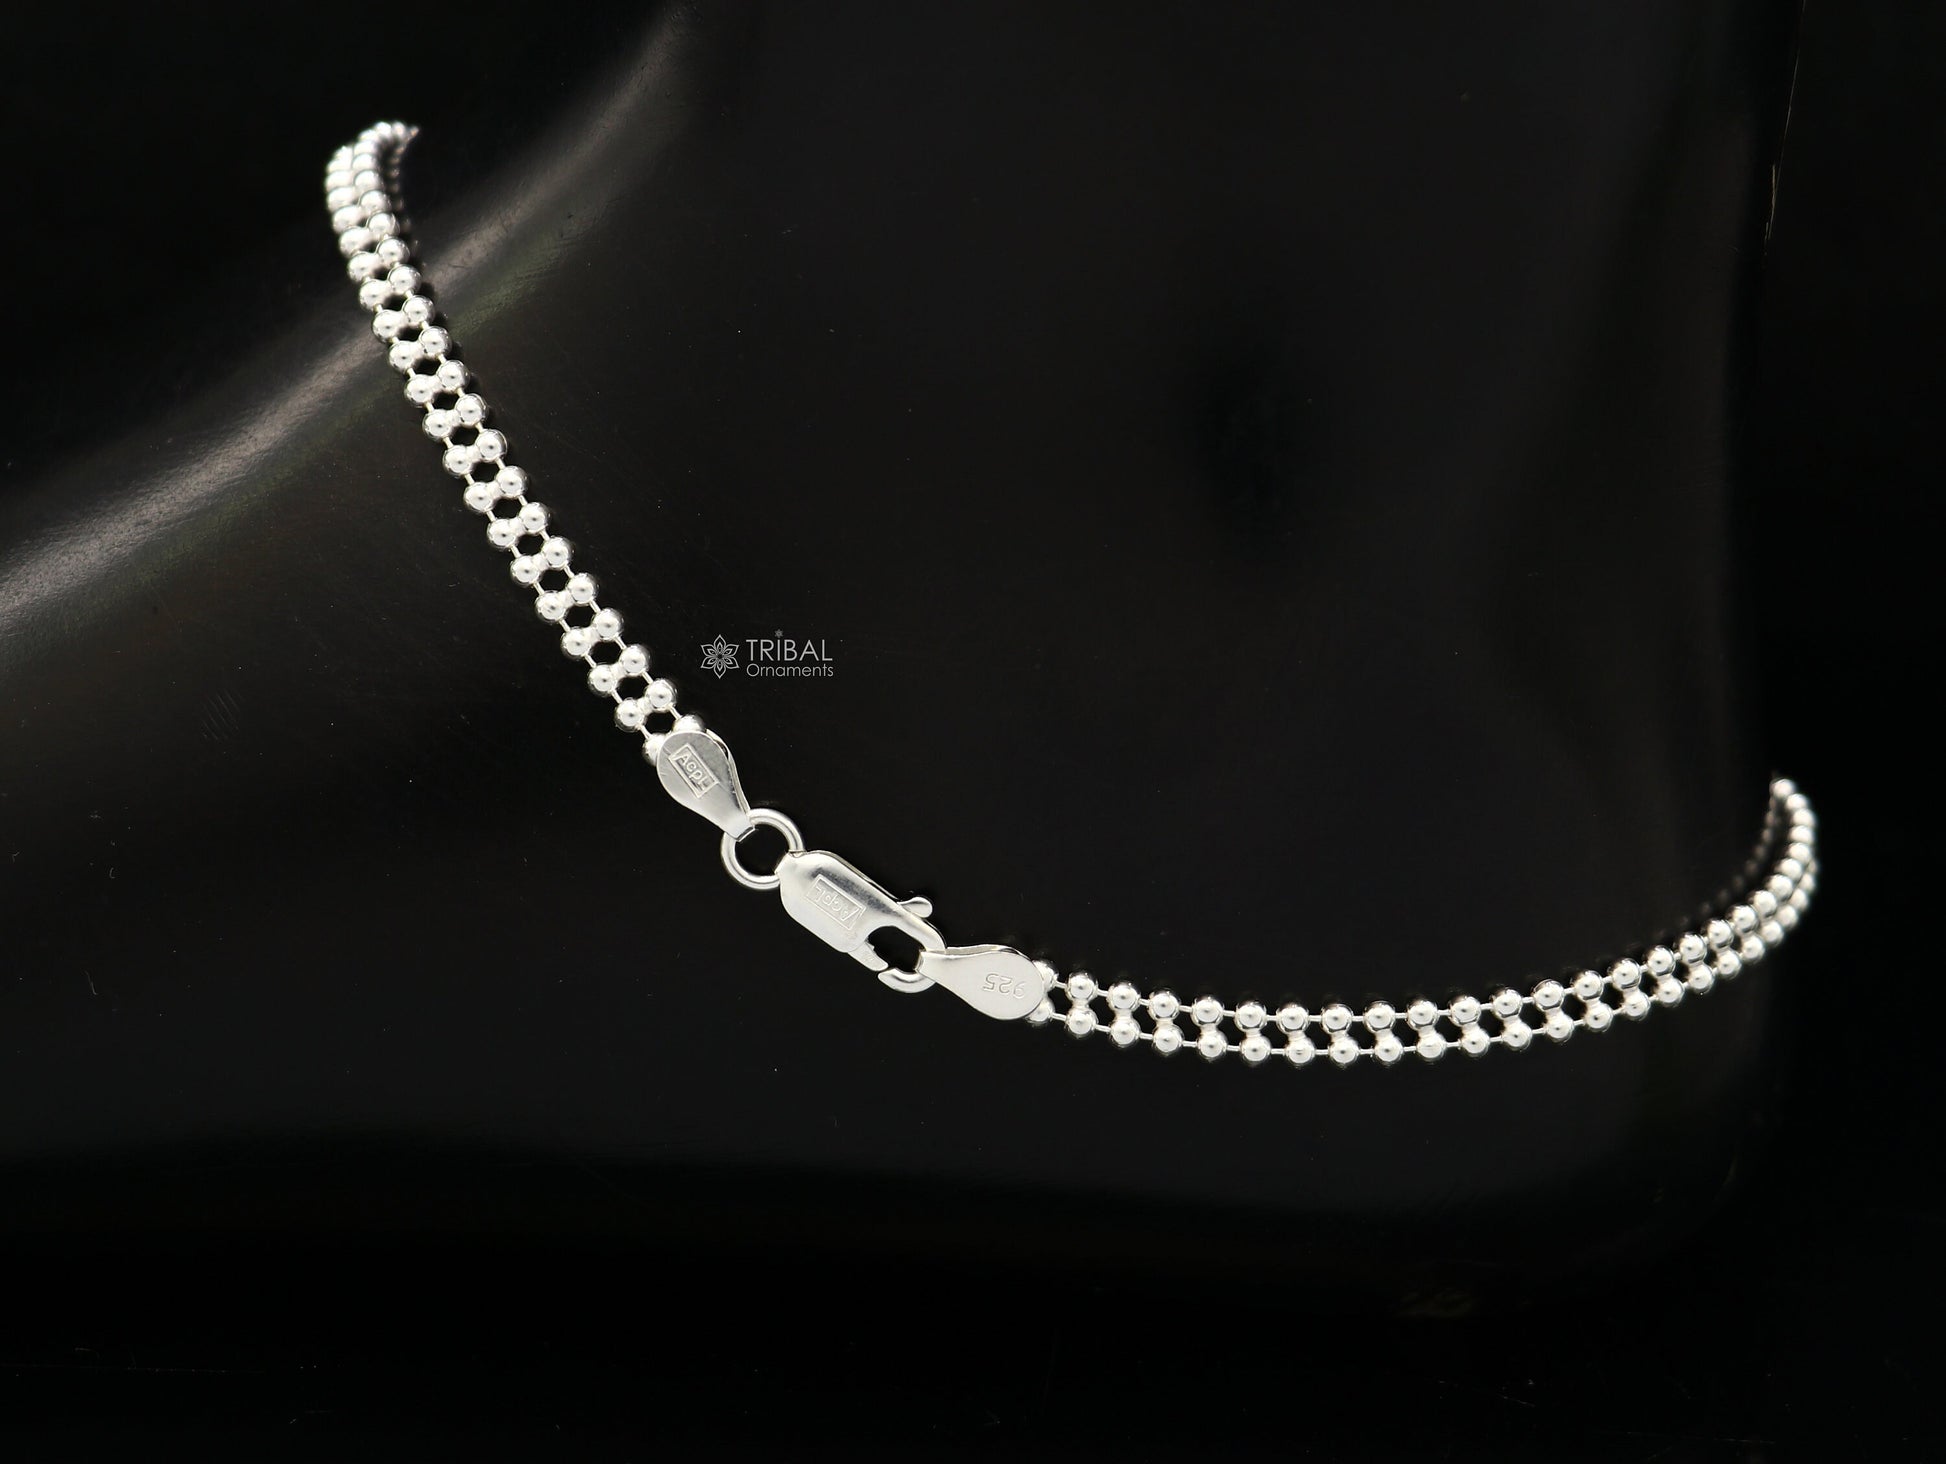 2mm 10.5" 925 sterling silver Double beaded/ball chain anklet bracelet light weight delicate anklets belly dance silver jewelry ank612 - TRIBAL ORNAMENTS